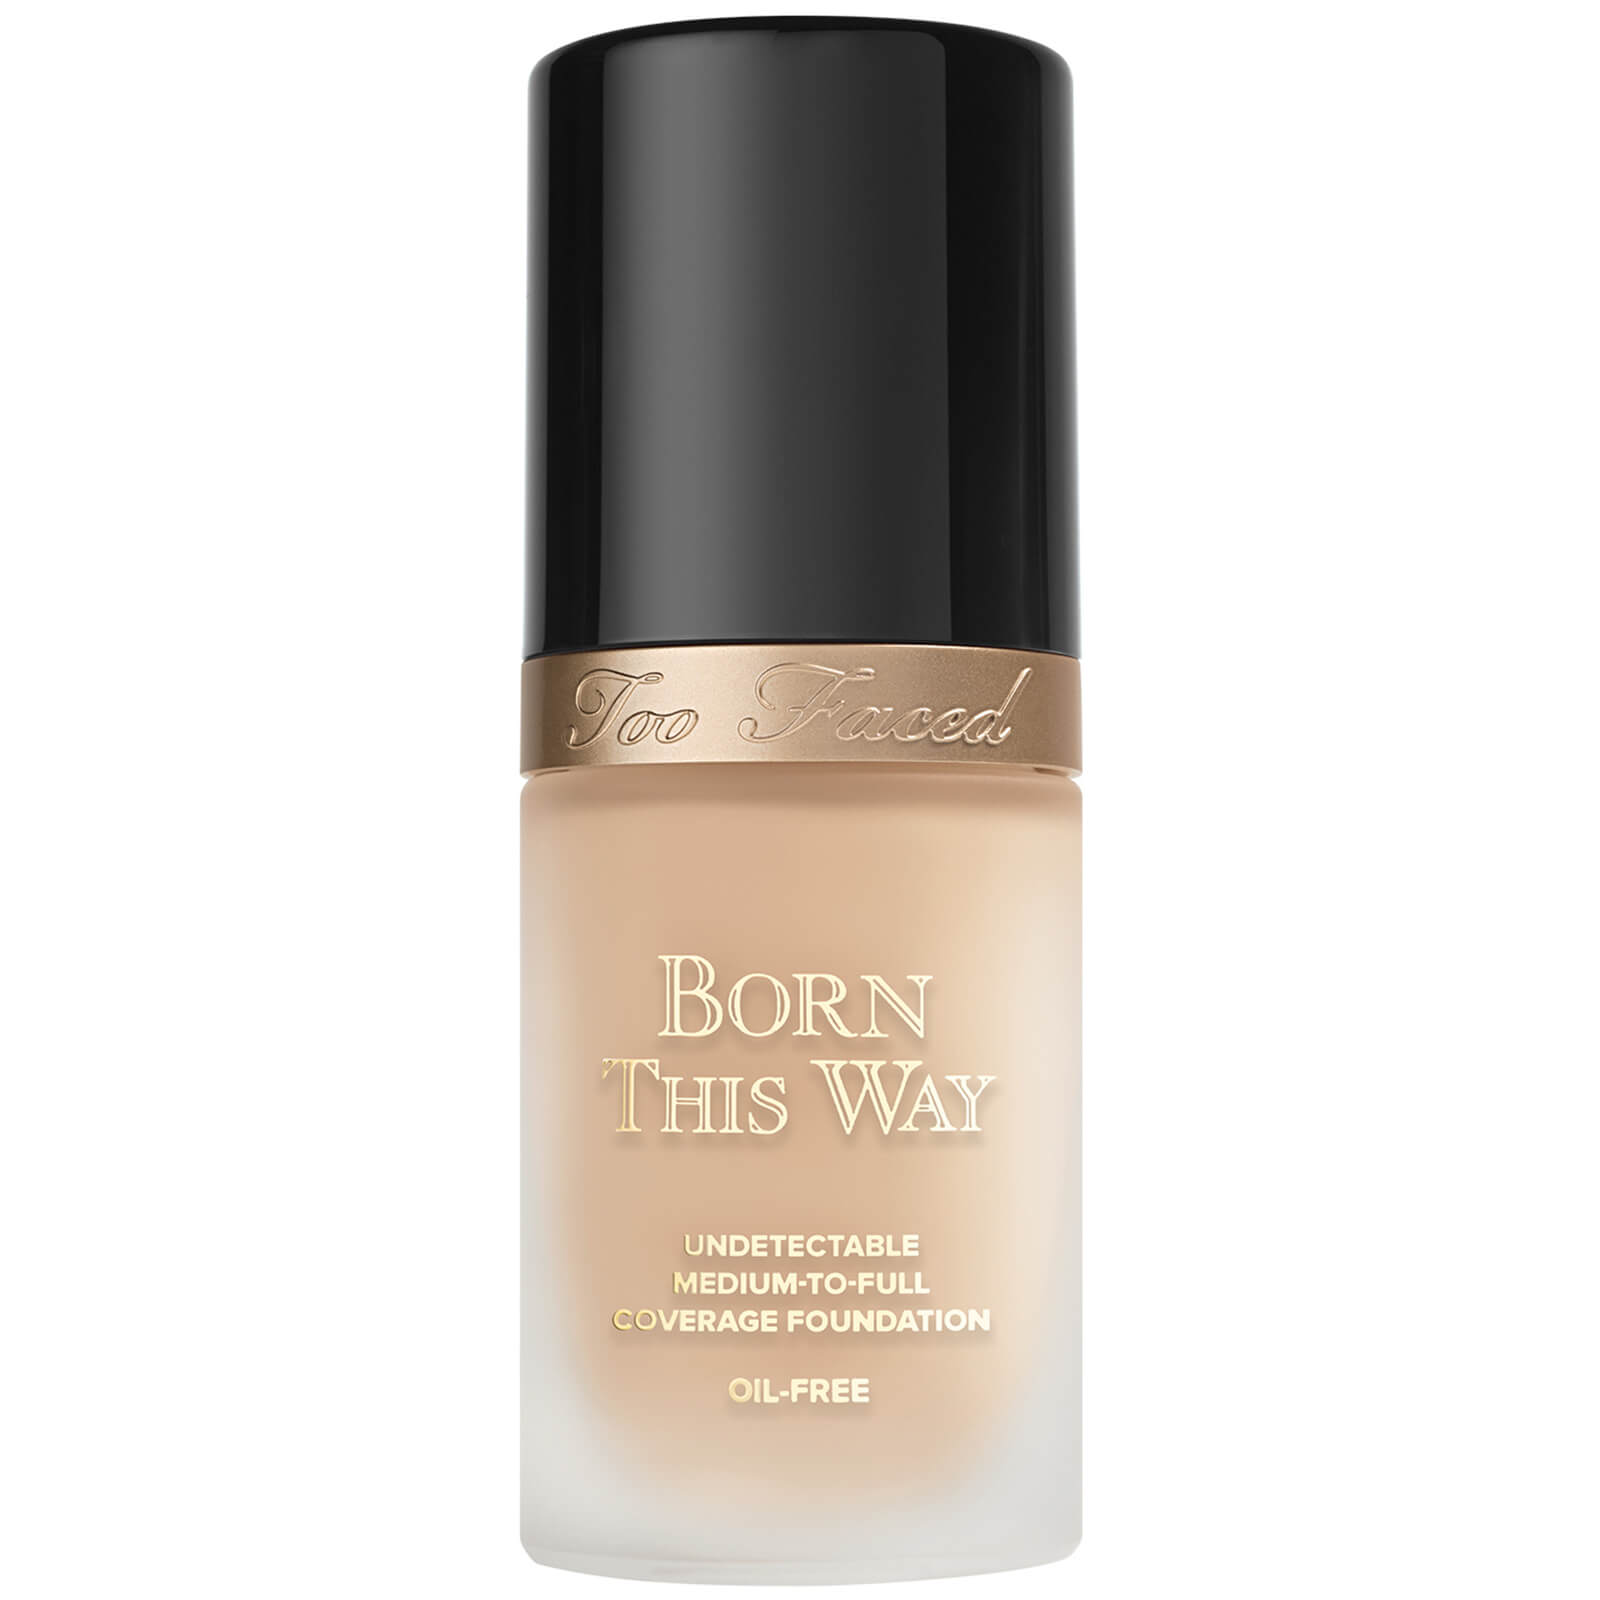 Too Faced Born This Way Foundation 30ml (Various Shades) - Porcelain